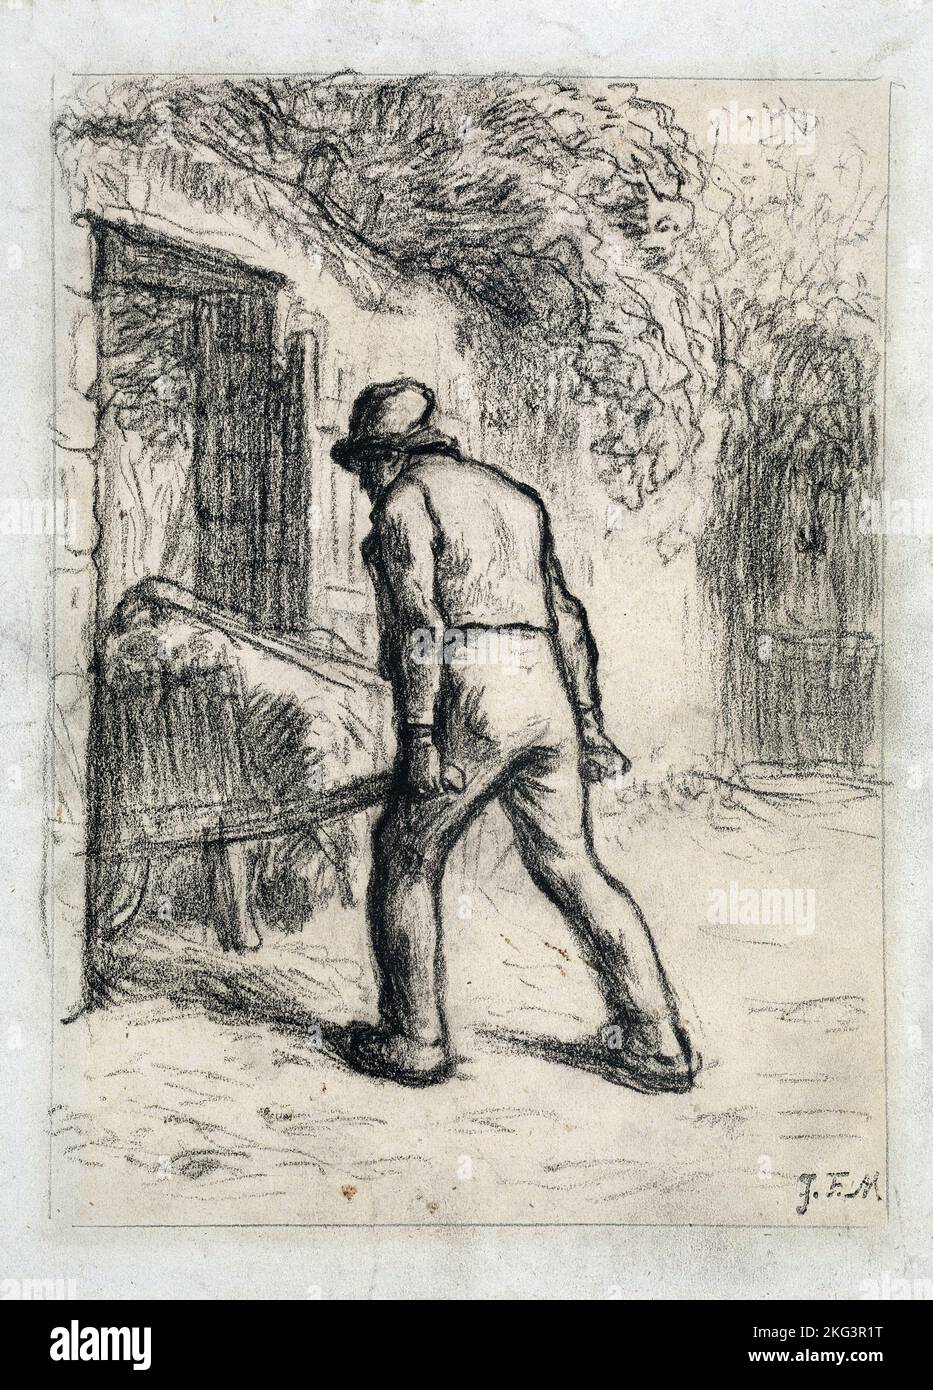 Jean-Francois Millet; Study for Man with a Wheelbarrow; Circa 1855-1856; Black conte crayon on beige wove paper; Museum of Fine Arts Boston, USA. Stock Photo